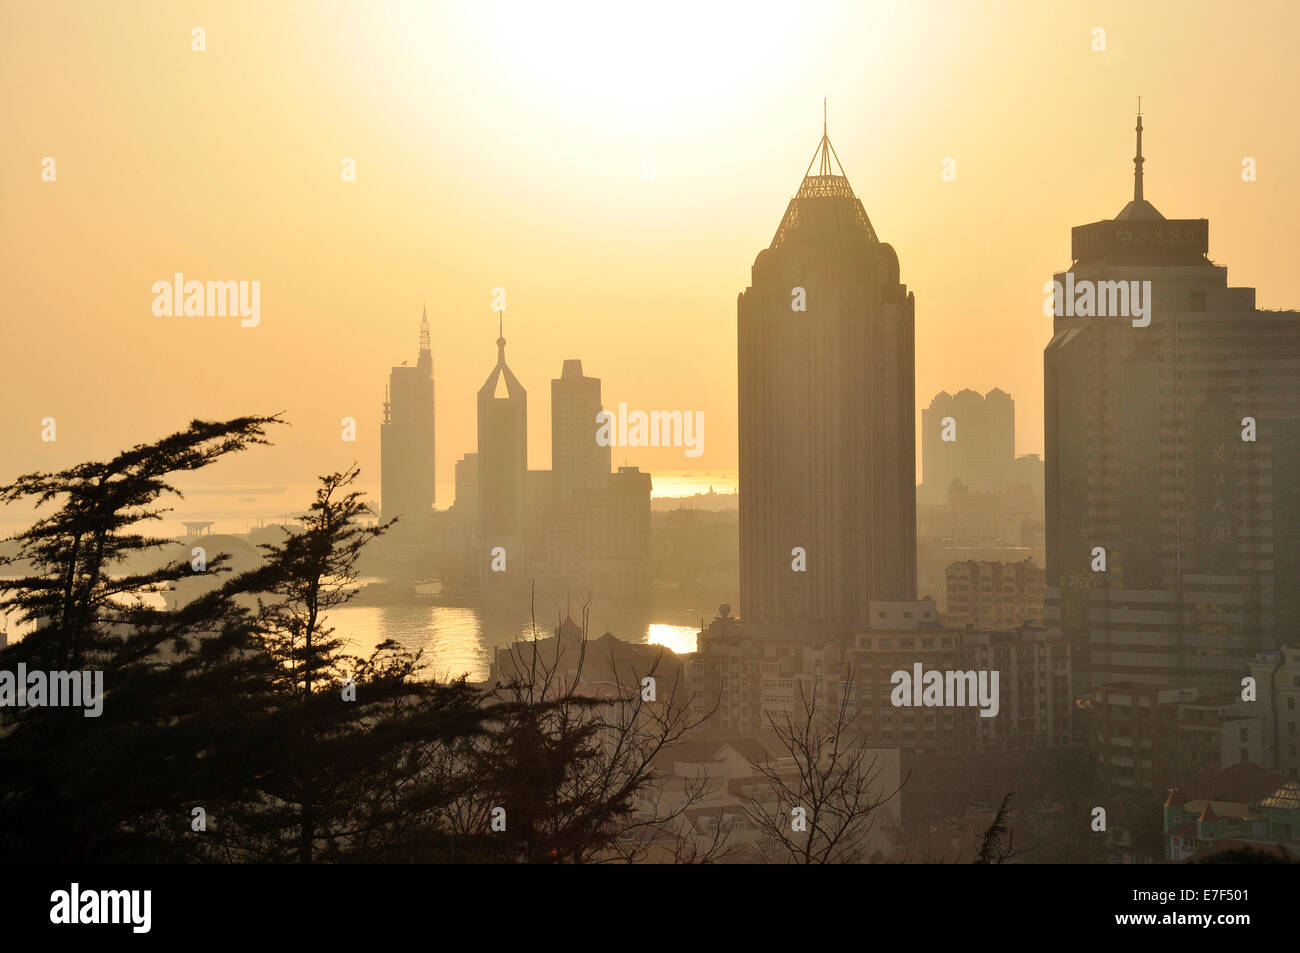 Skyline by the sea in Qingdao, Shandong, China Stock Photo